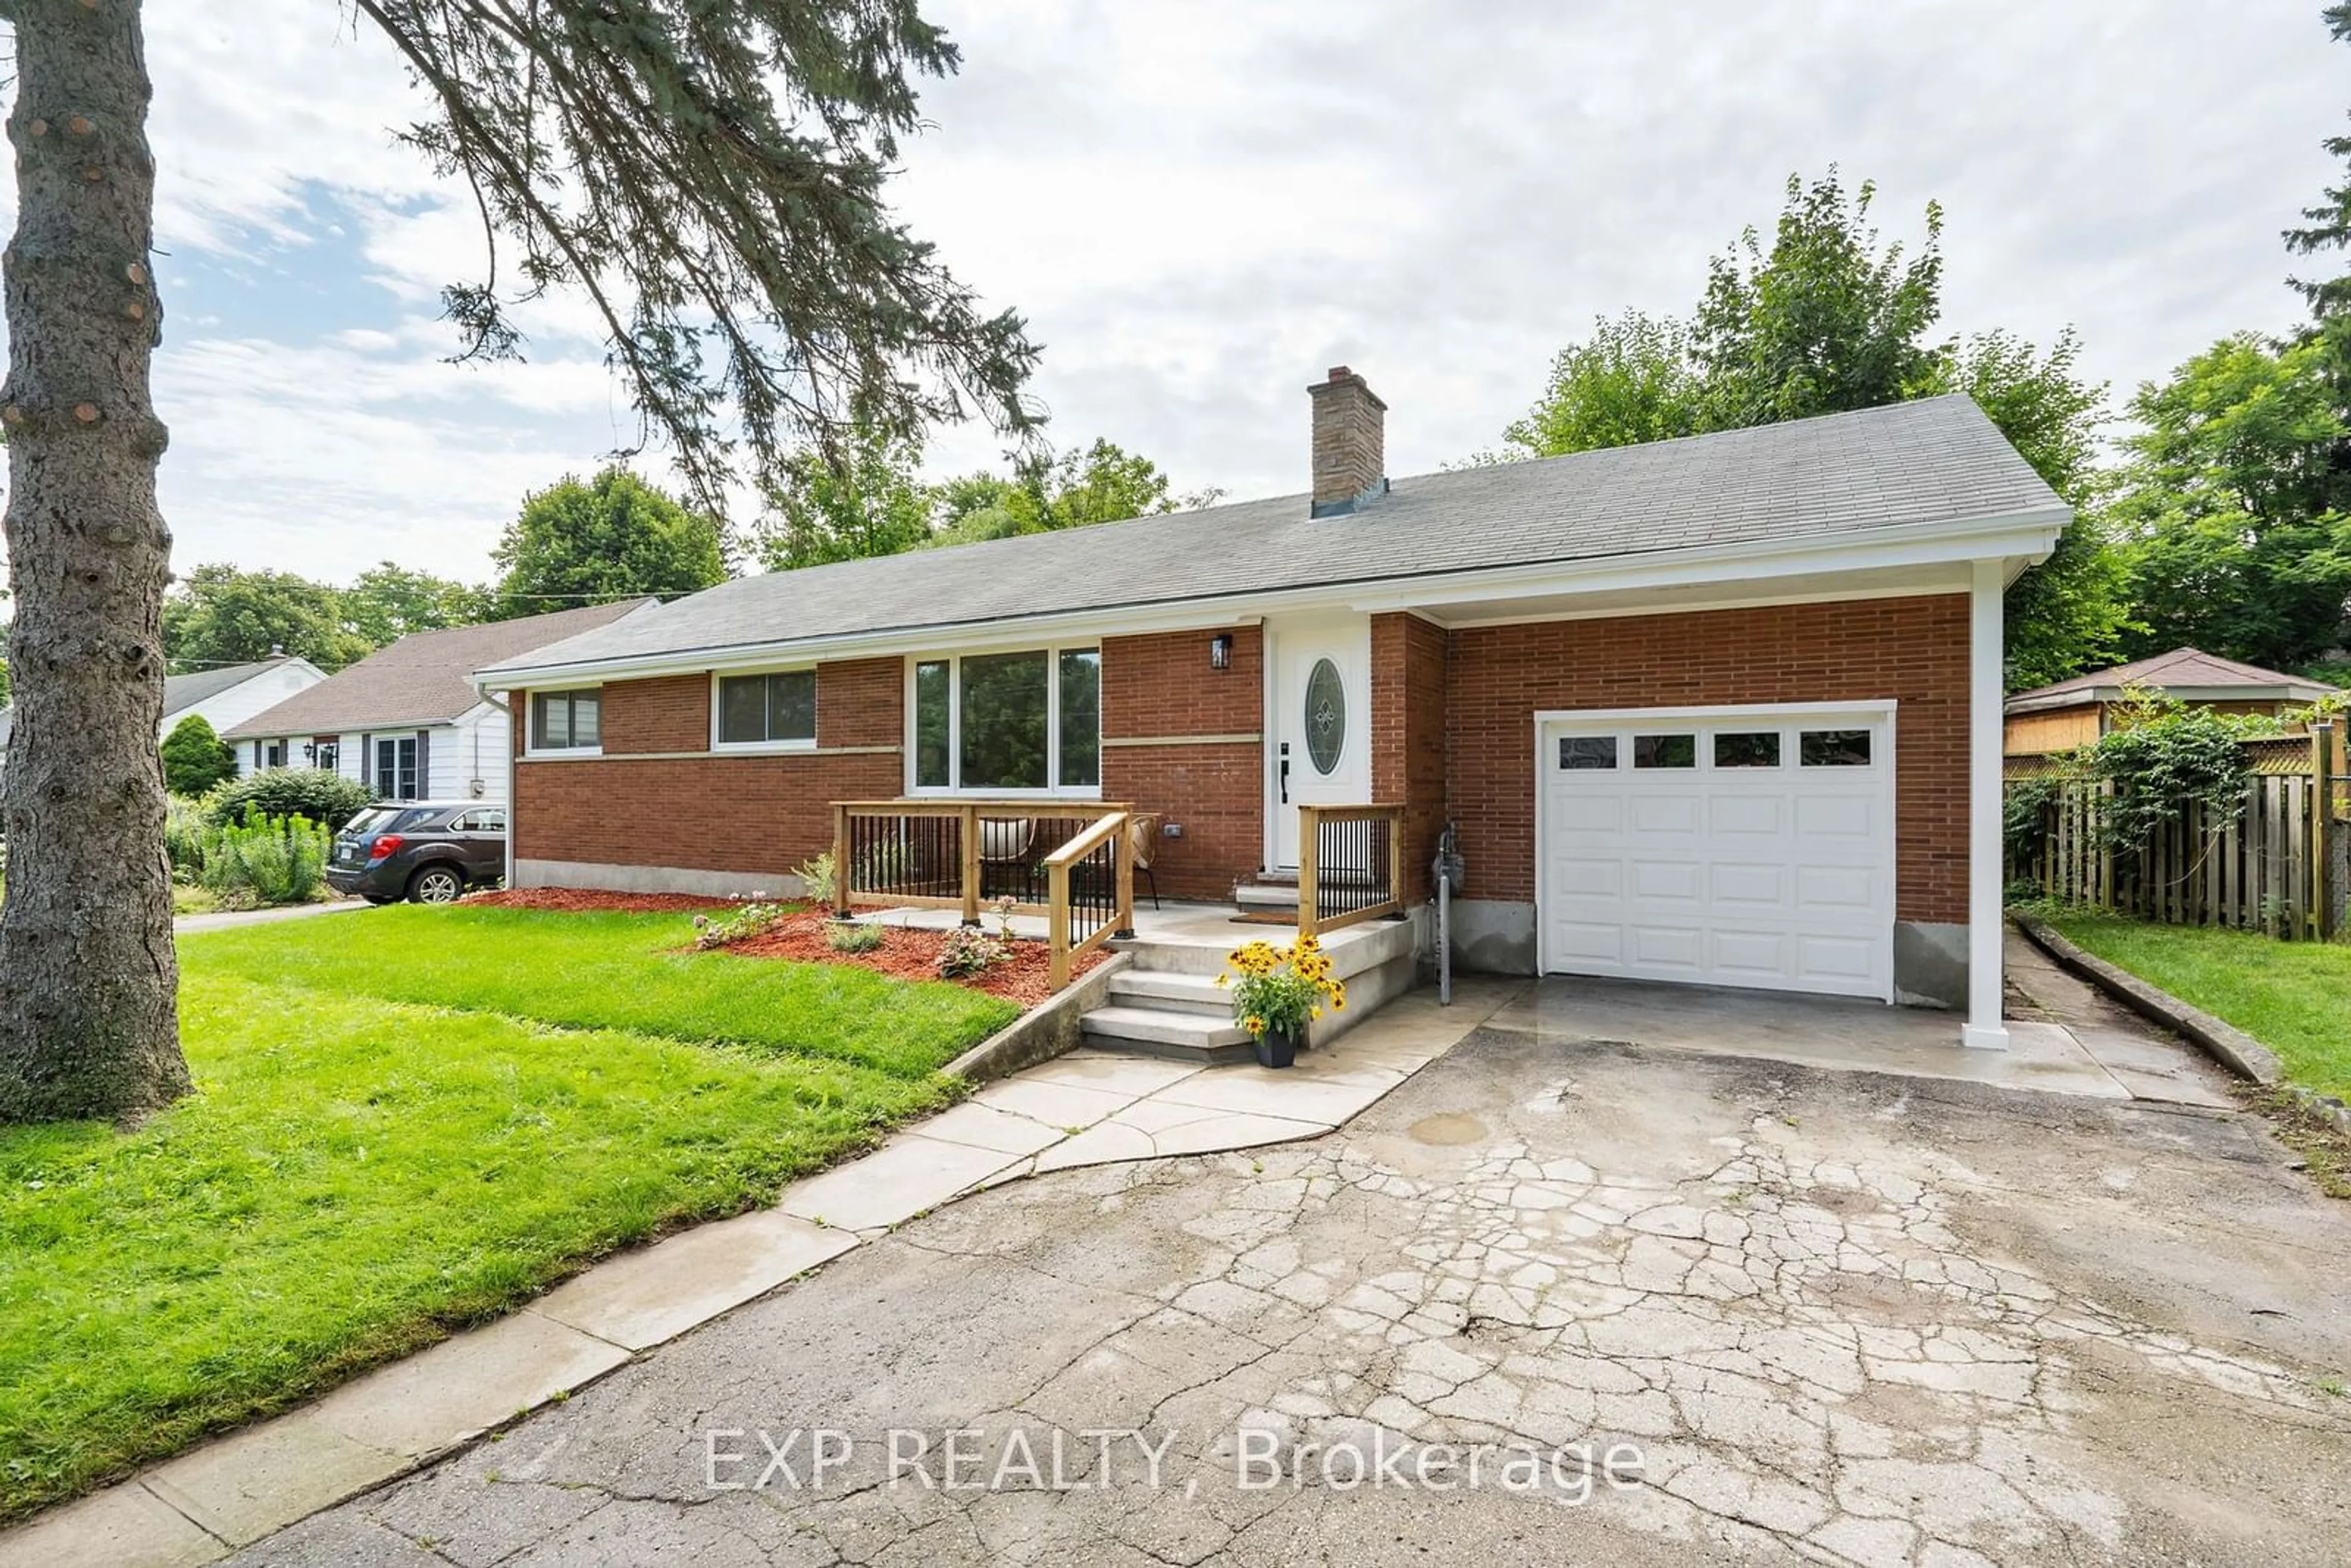 Home with brick exterior material for 6979 James St, London Ontario N6P 1A1